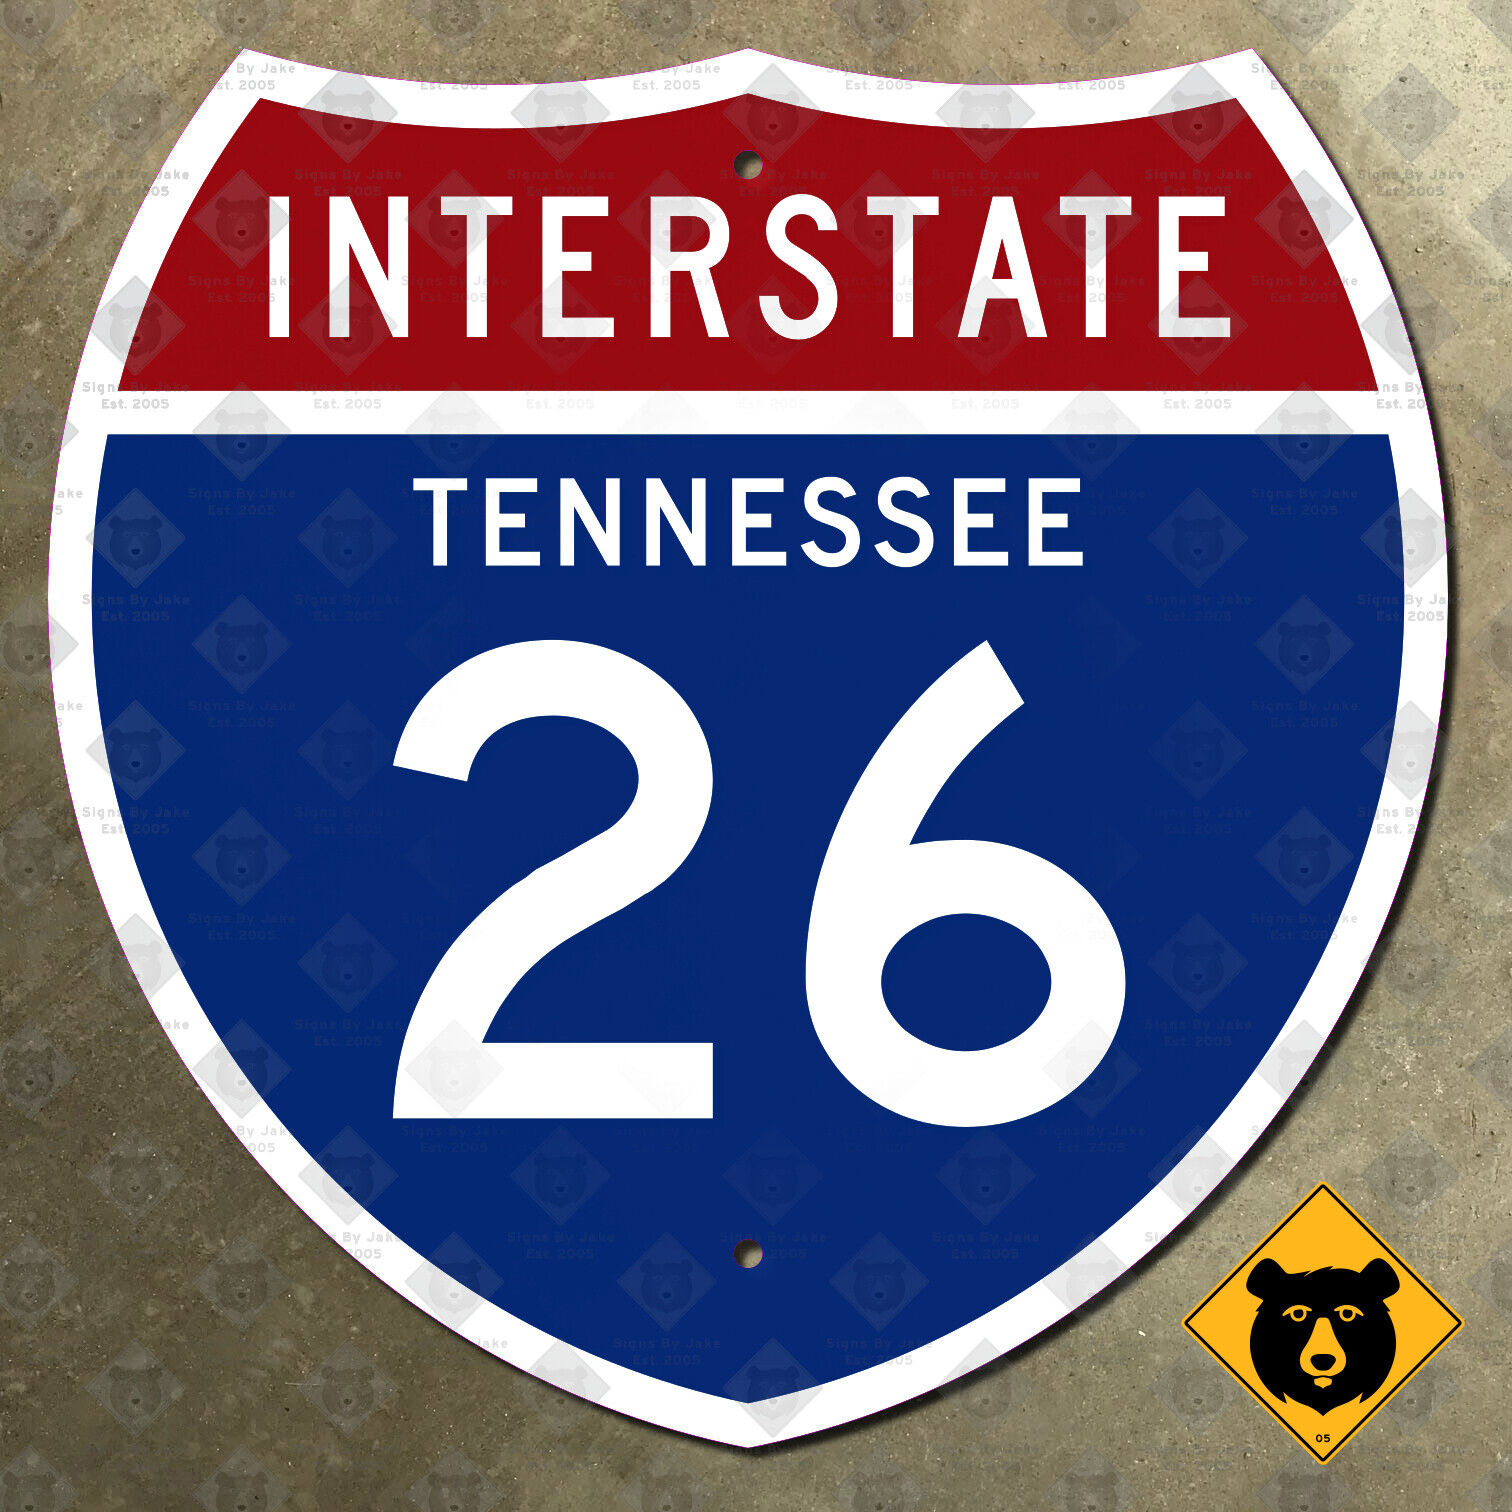 Tennessee Interstate 26 highway route sign 1957 Kingsport Johnson City 18x18